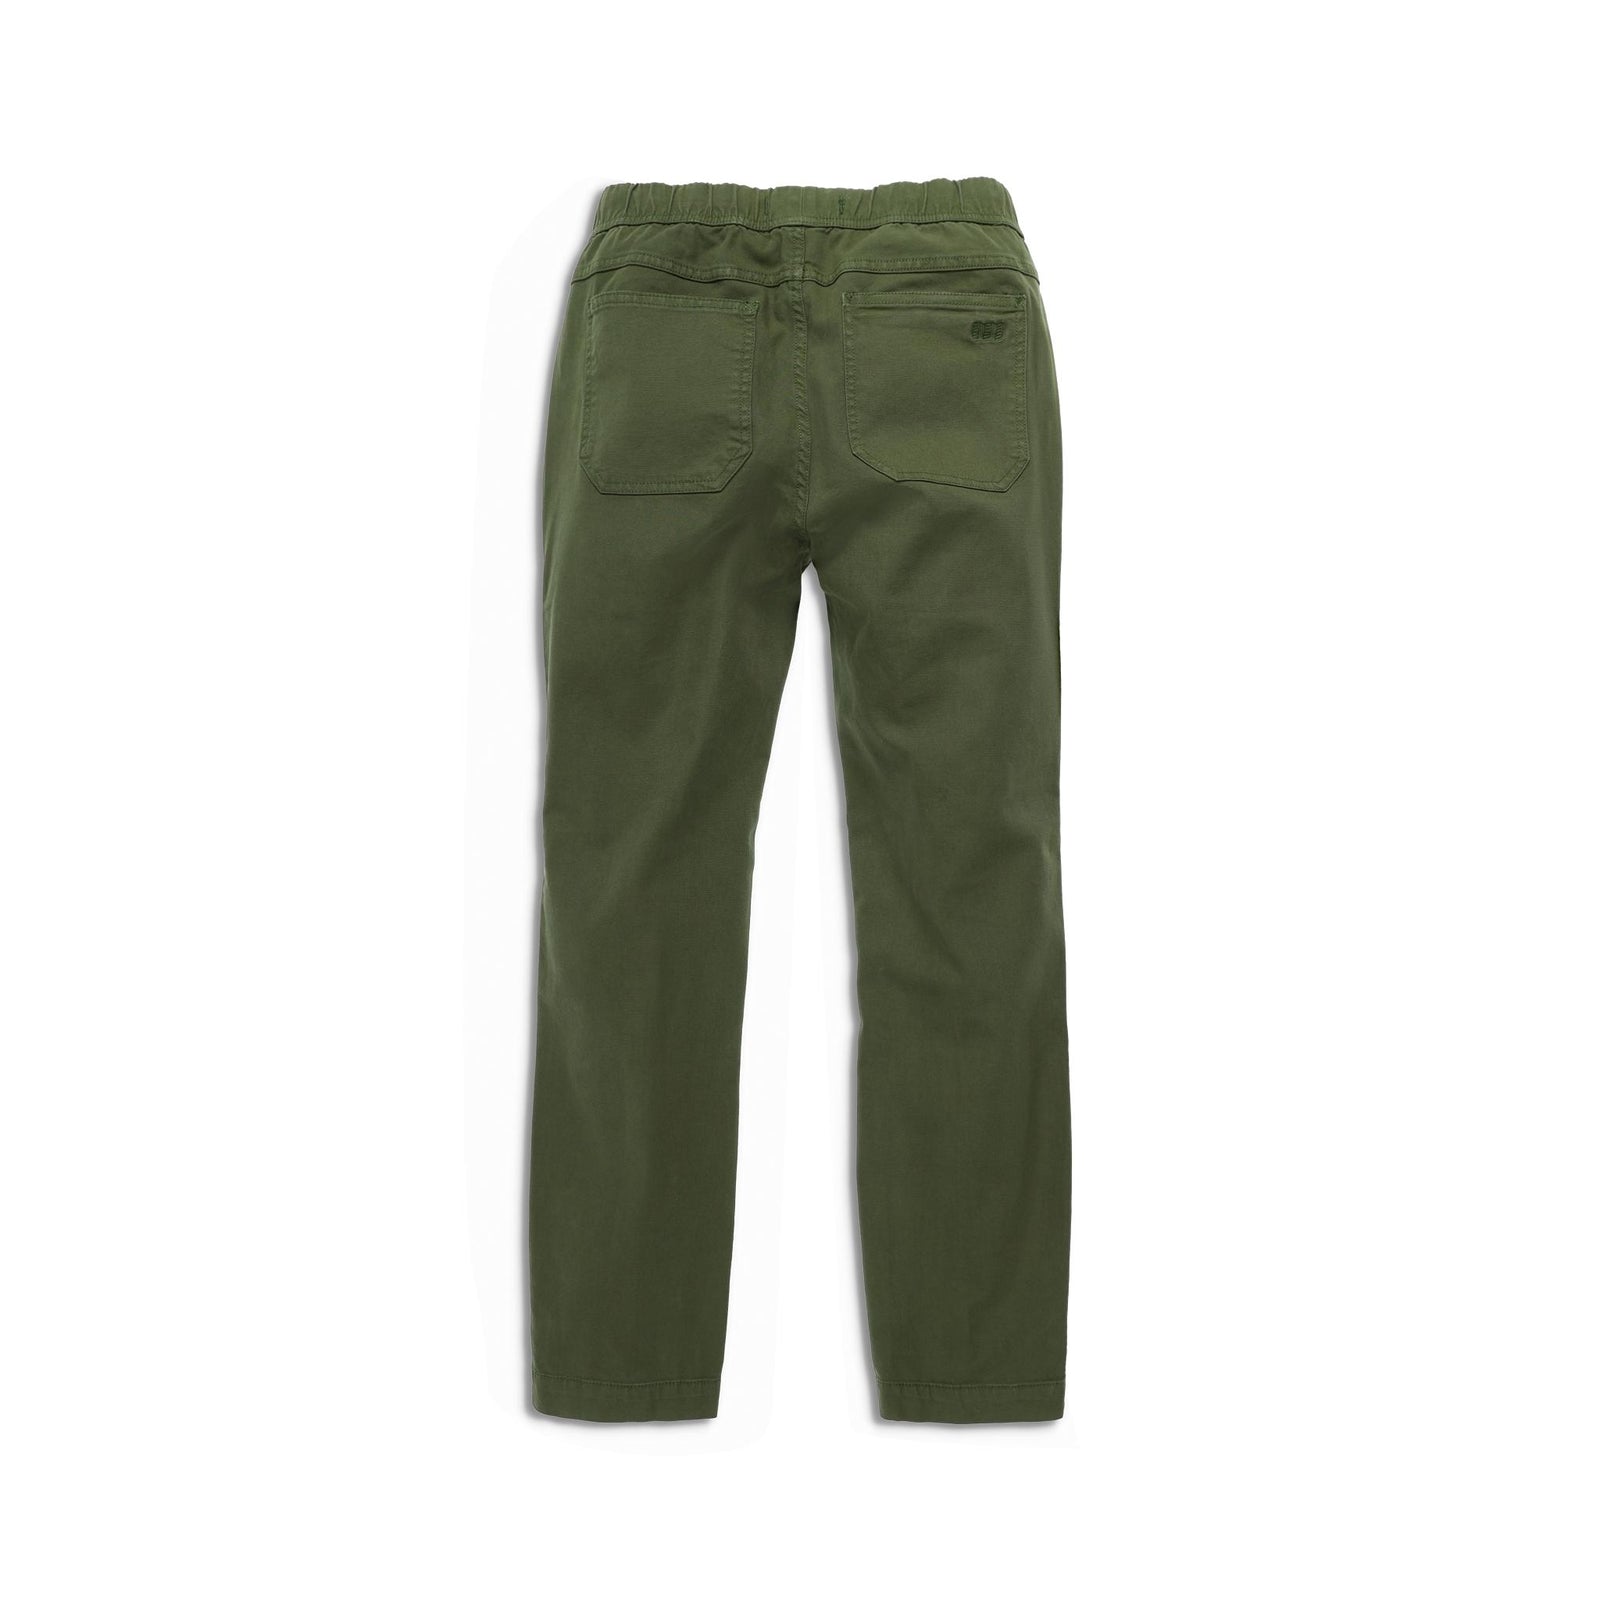 Back View of Topo Designs Dirt Pants Slim - Women's in "Olive"